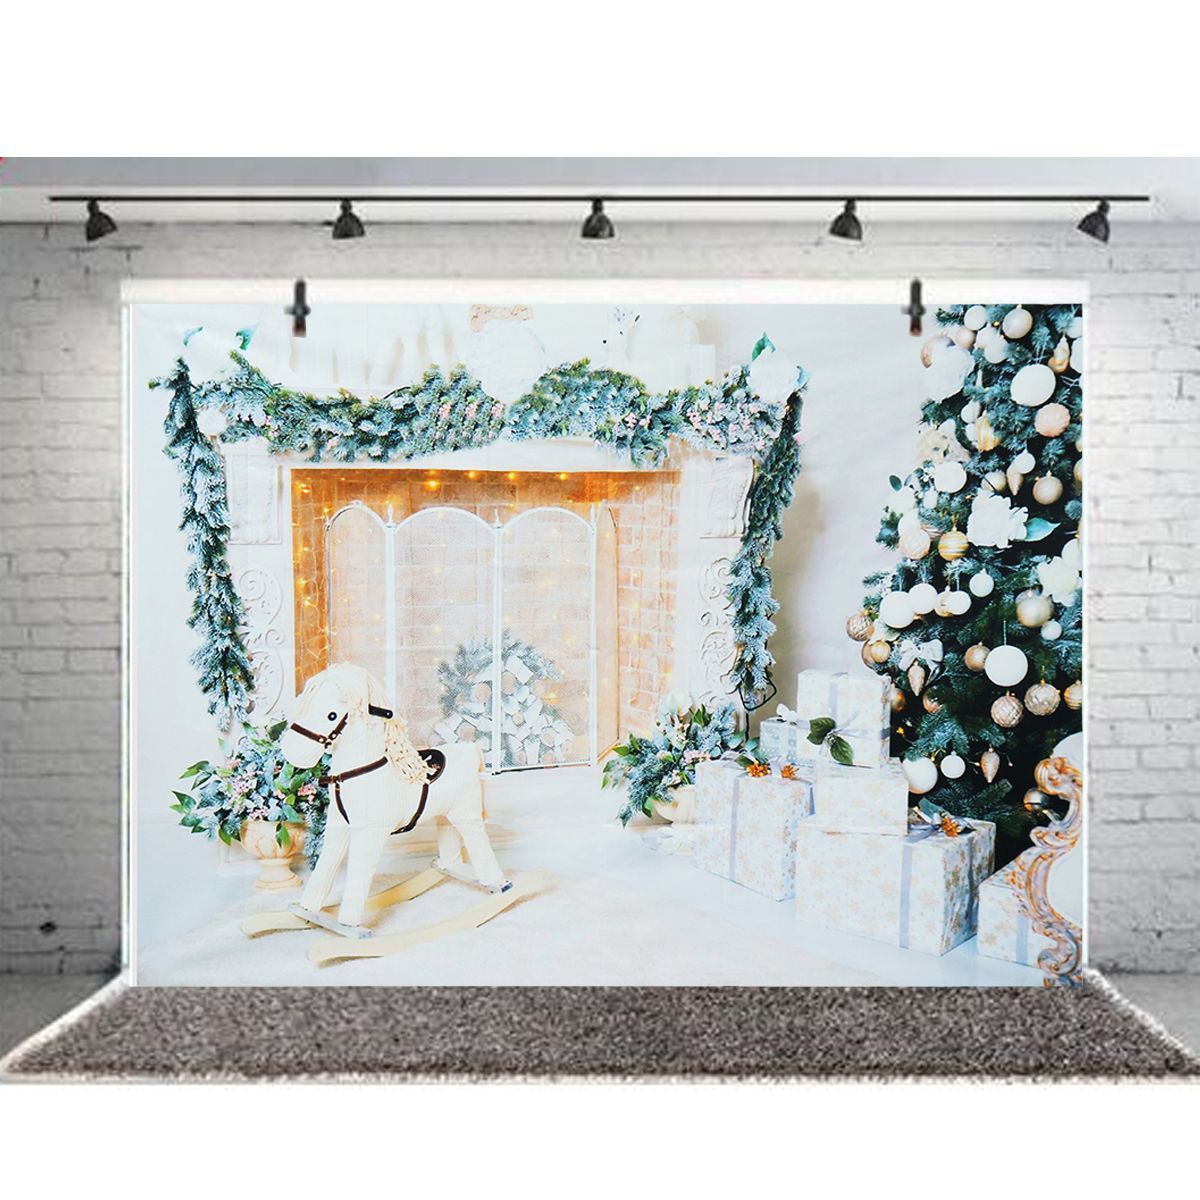 7x5FT-White-Room-Christmas-Tree-Gift-Wooden-Horse-Photography-Backdrop-Studio-Prop-Background-1404981